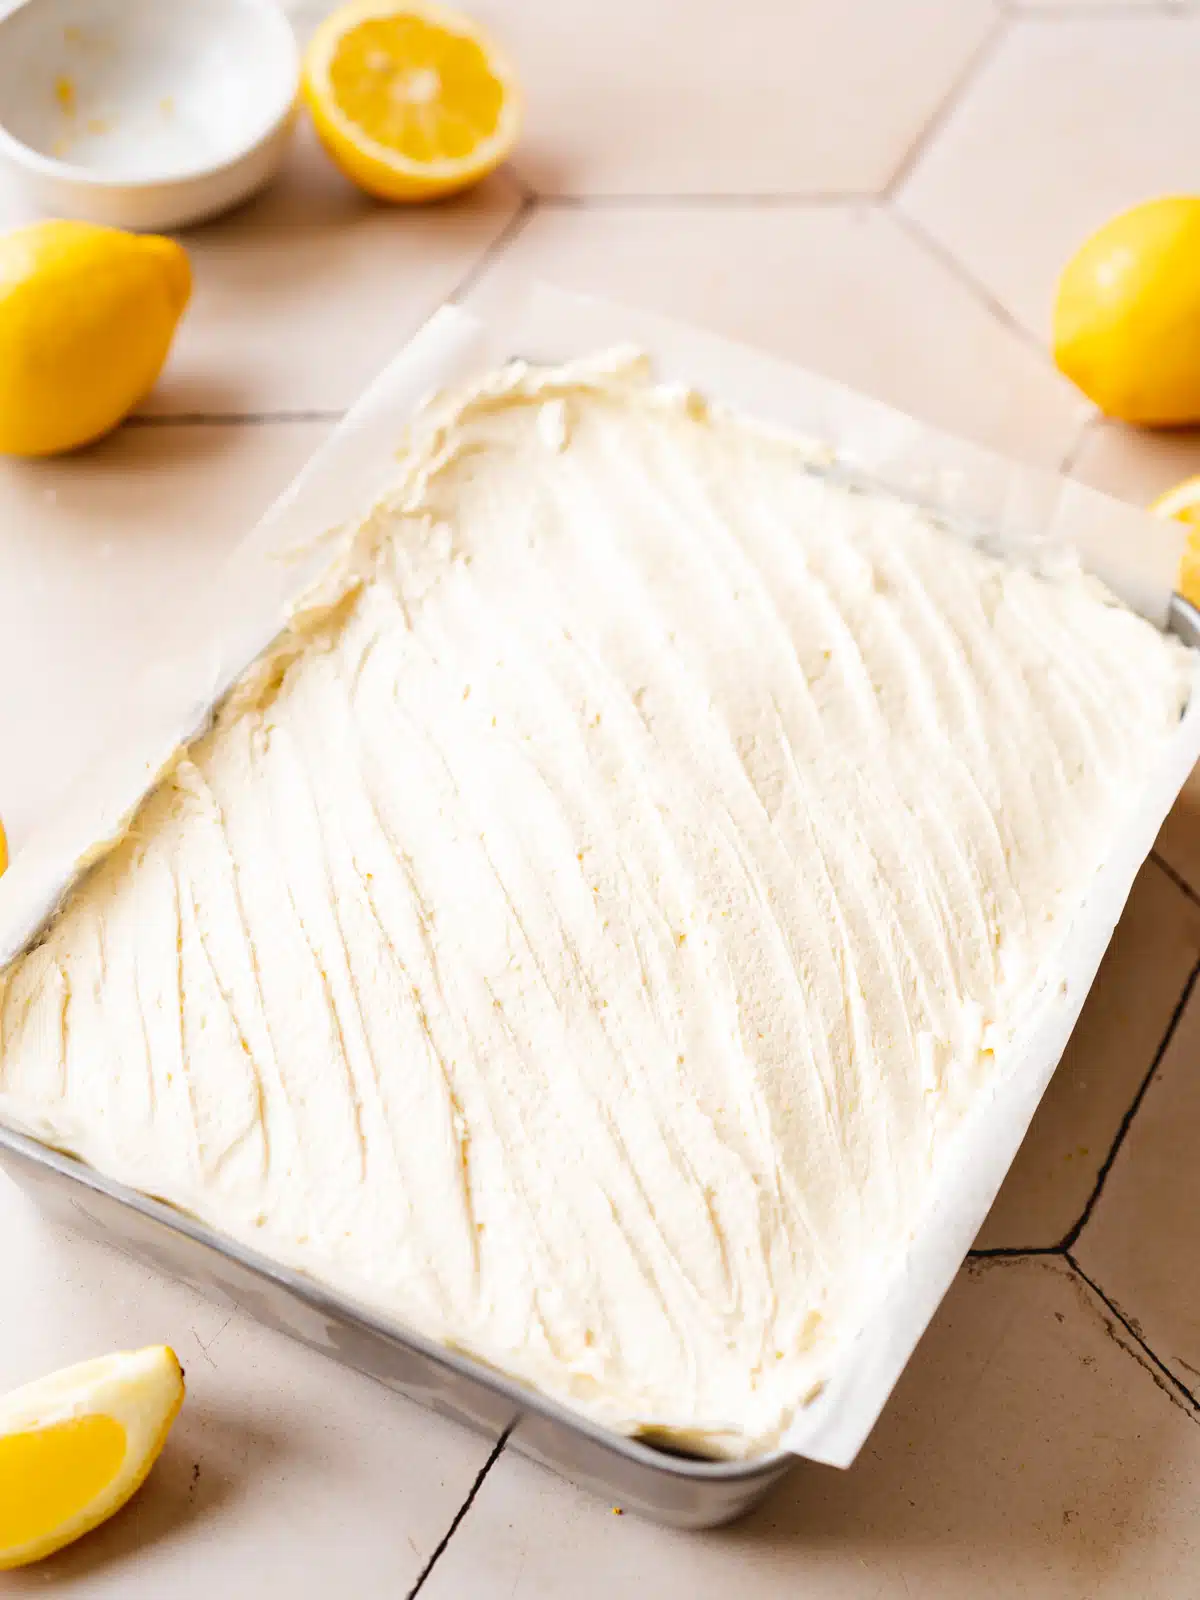 vegan lemon sheet cake with lemon frosting smoothed on top of it showing the smooth and creamy consistency.